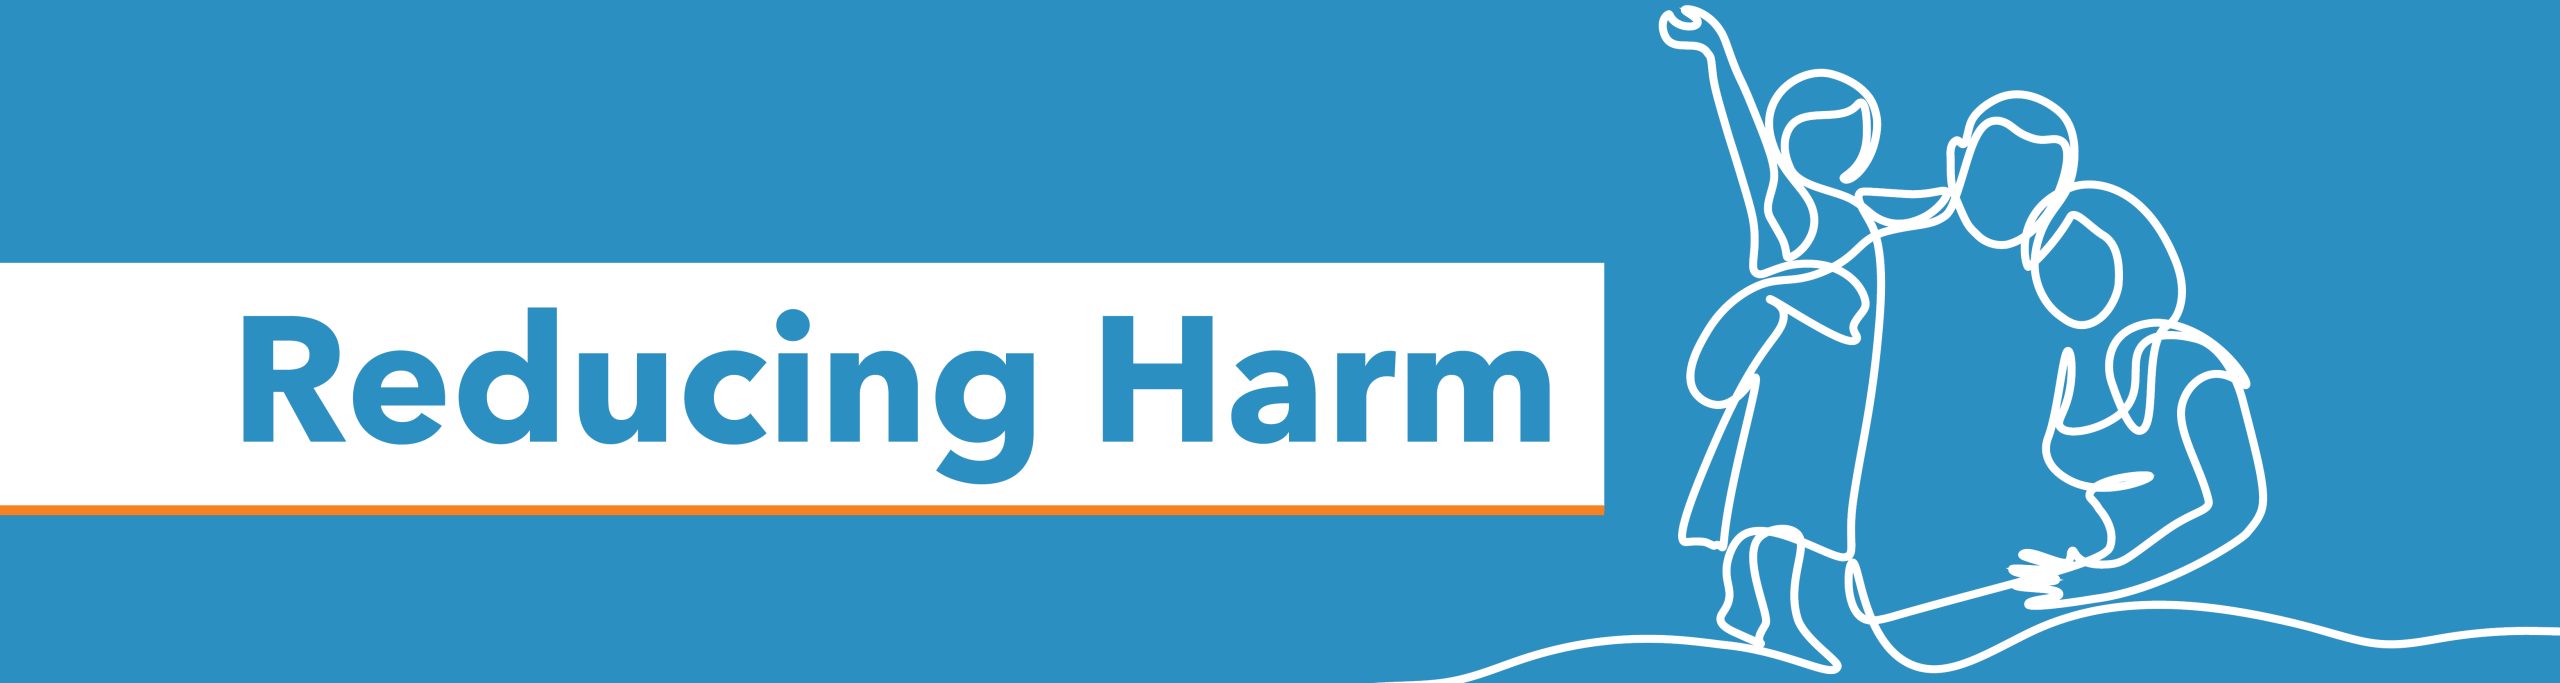 Email your local MP to say Thank You for reducing gambling harm in Tasmania.